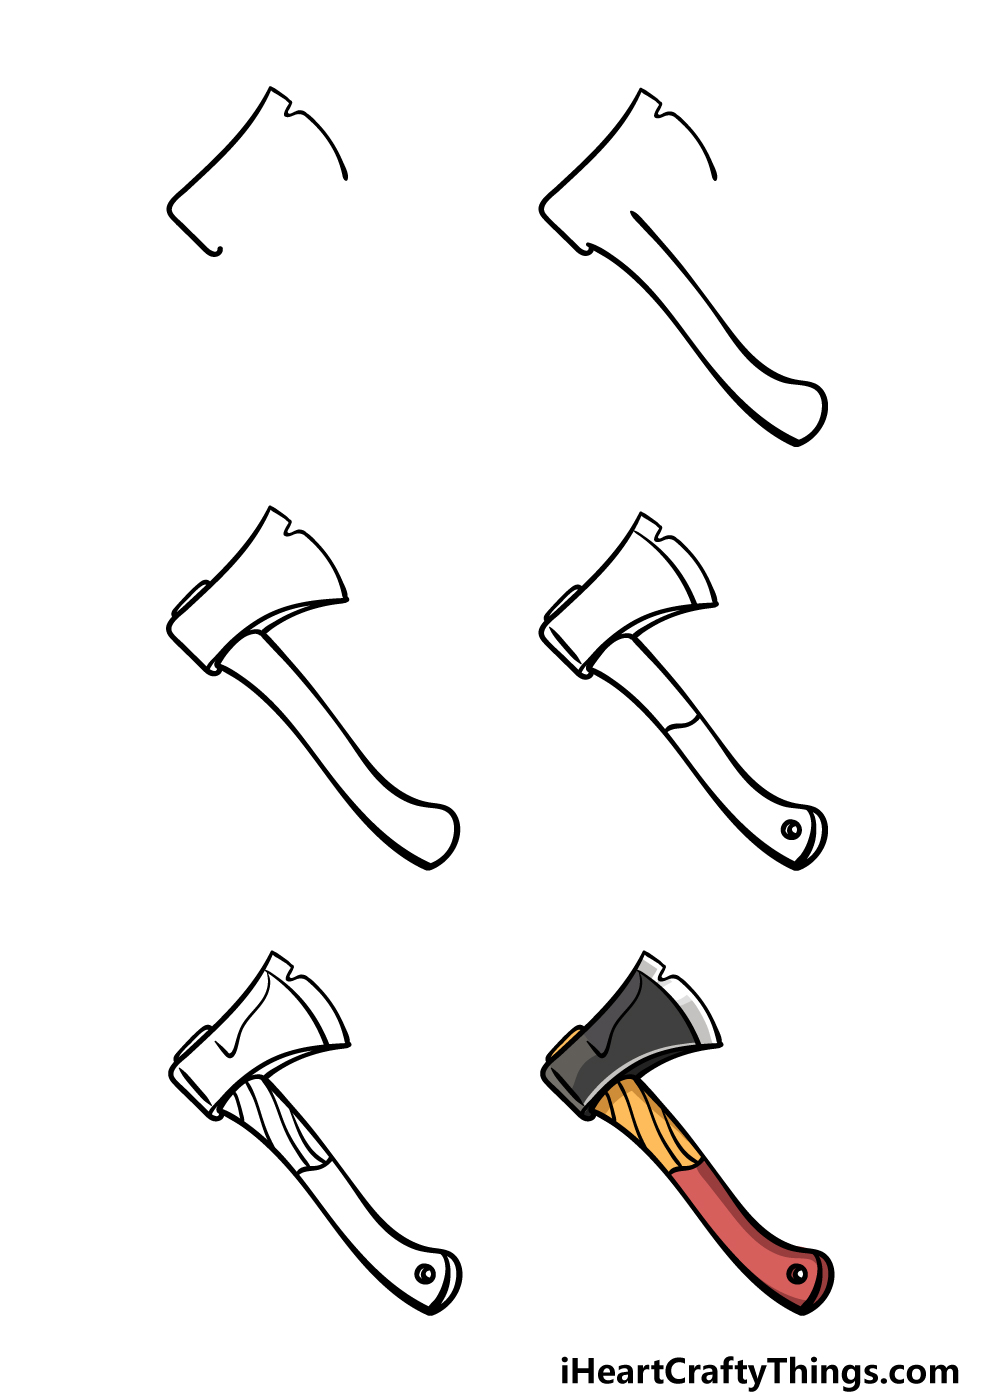 how to draw an axe in 6 steps